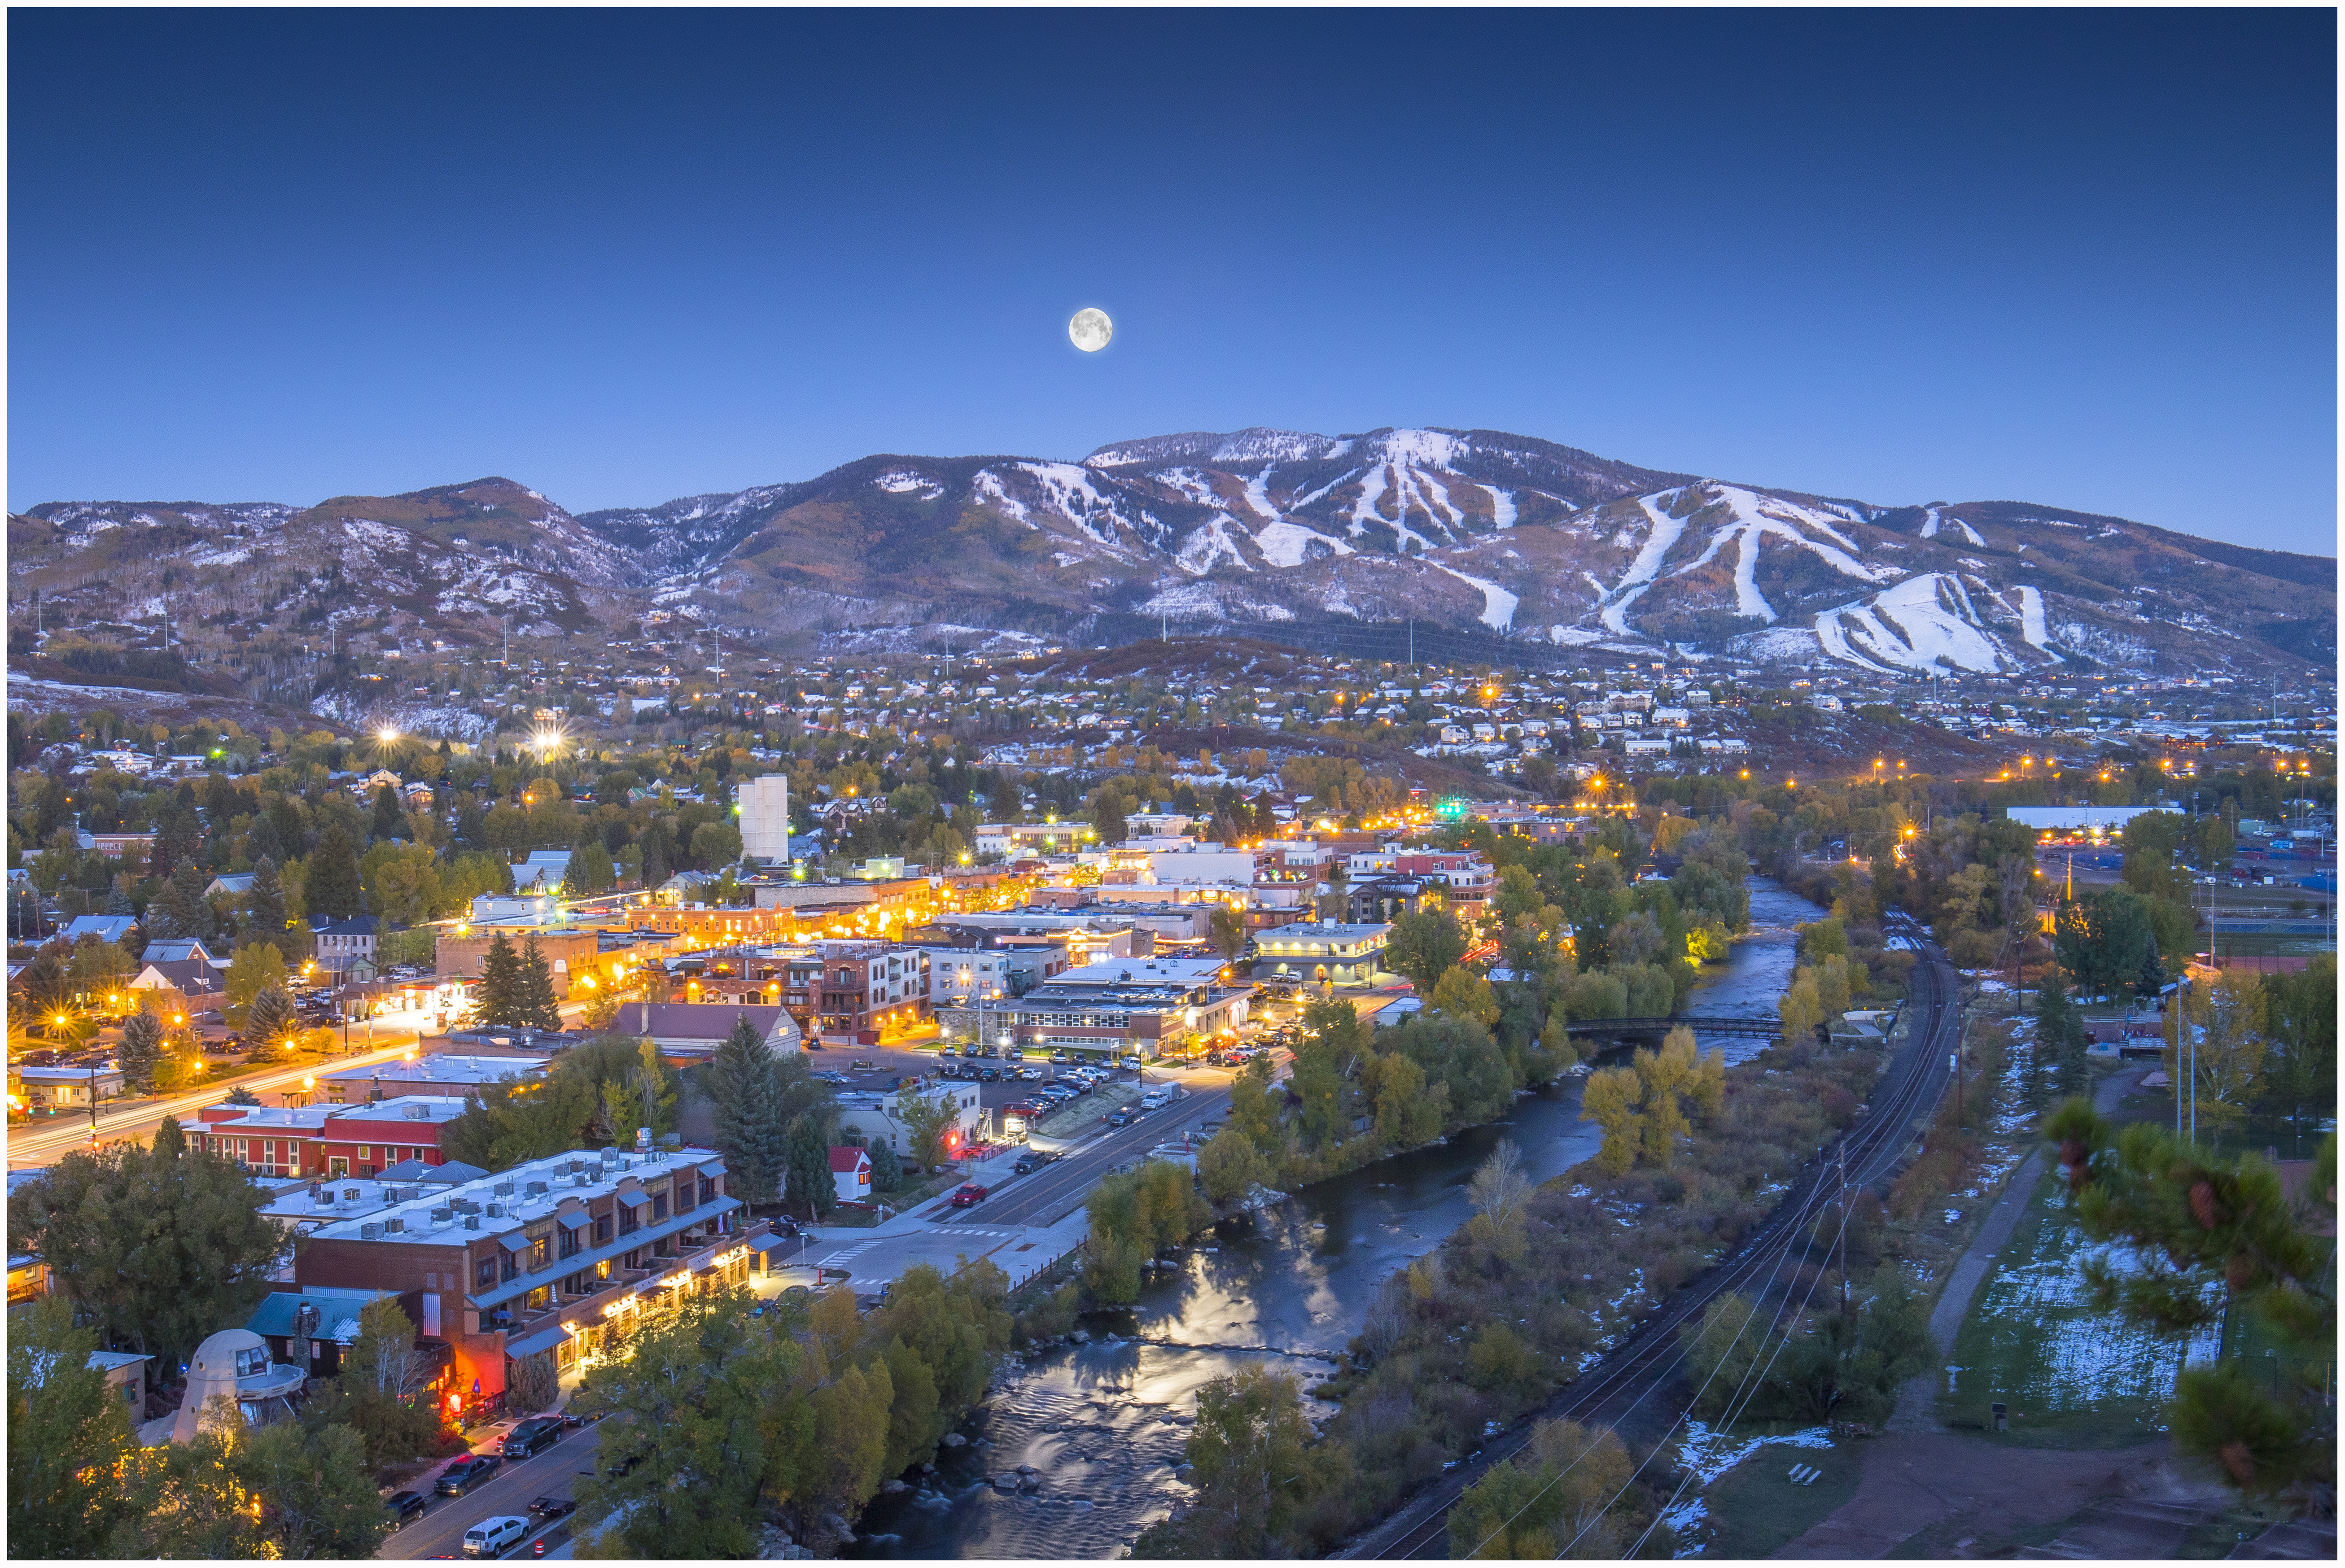 The City of Steamboat Springs, with the Yampa River and Core Trail visible. Photo by Noah Wetzel.